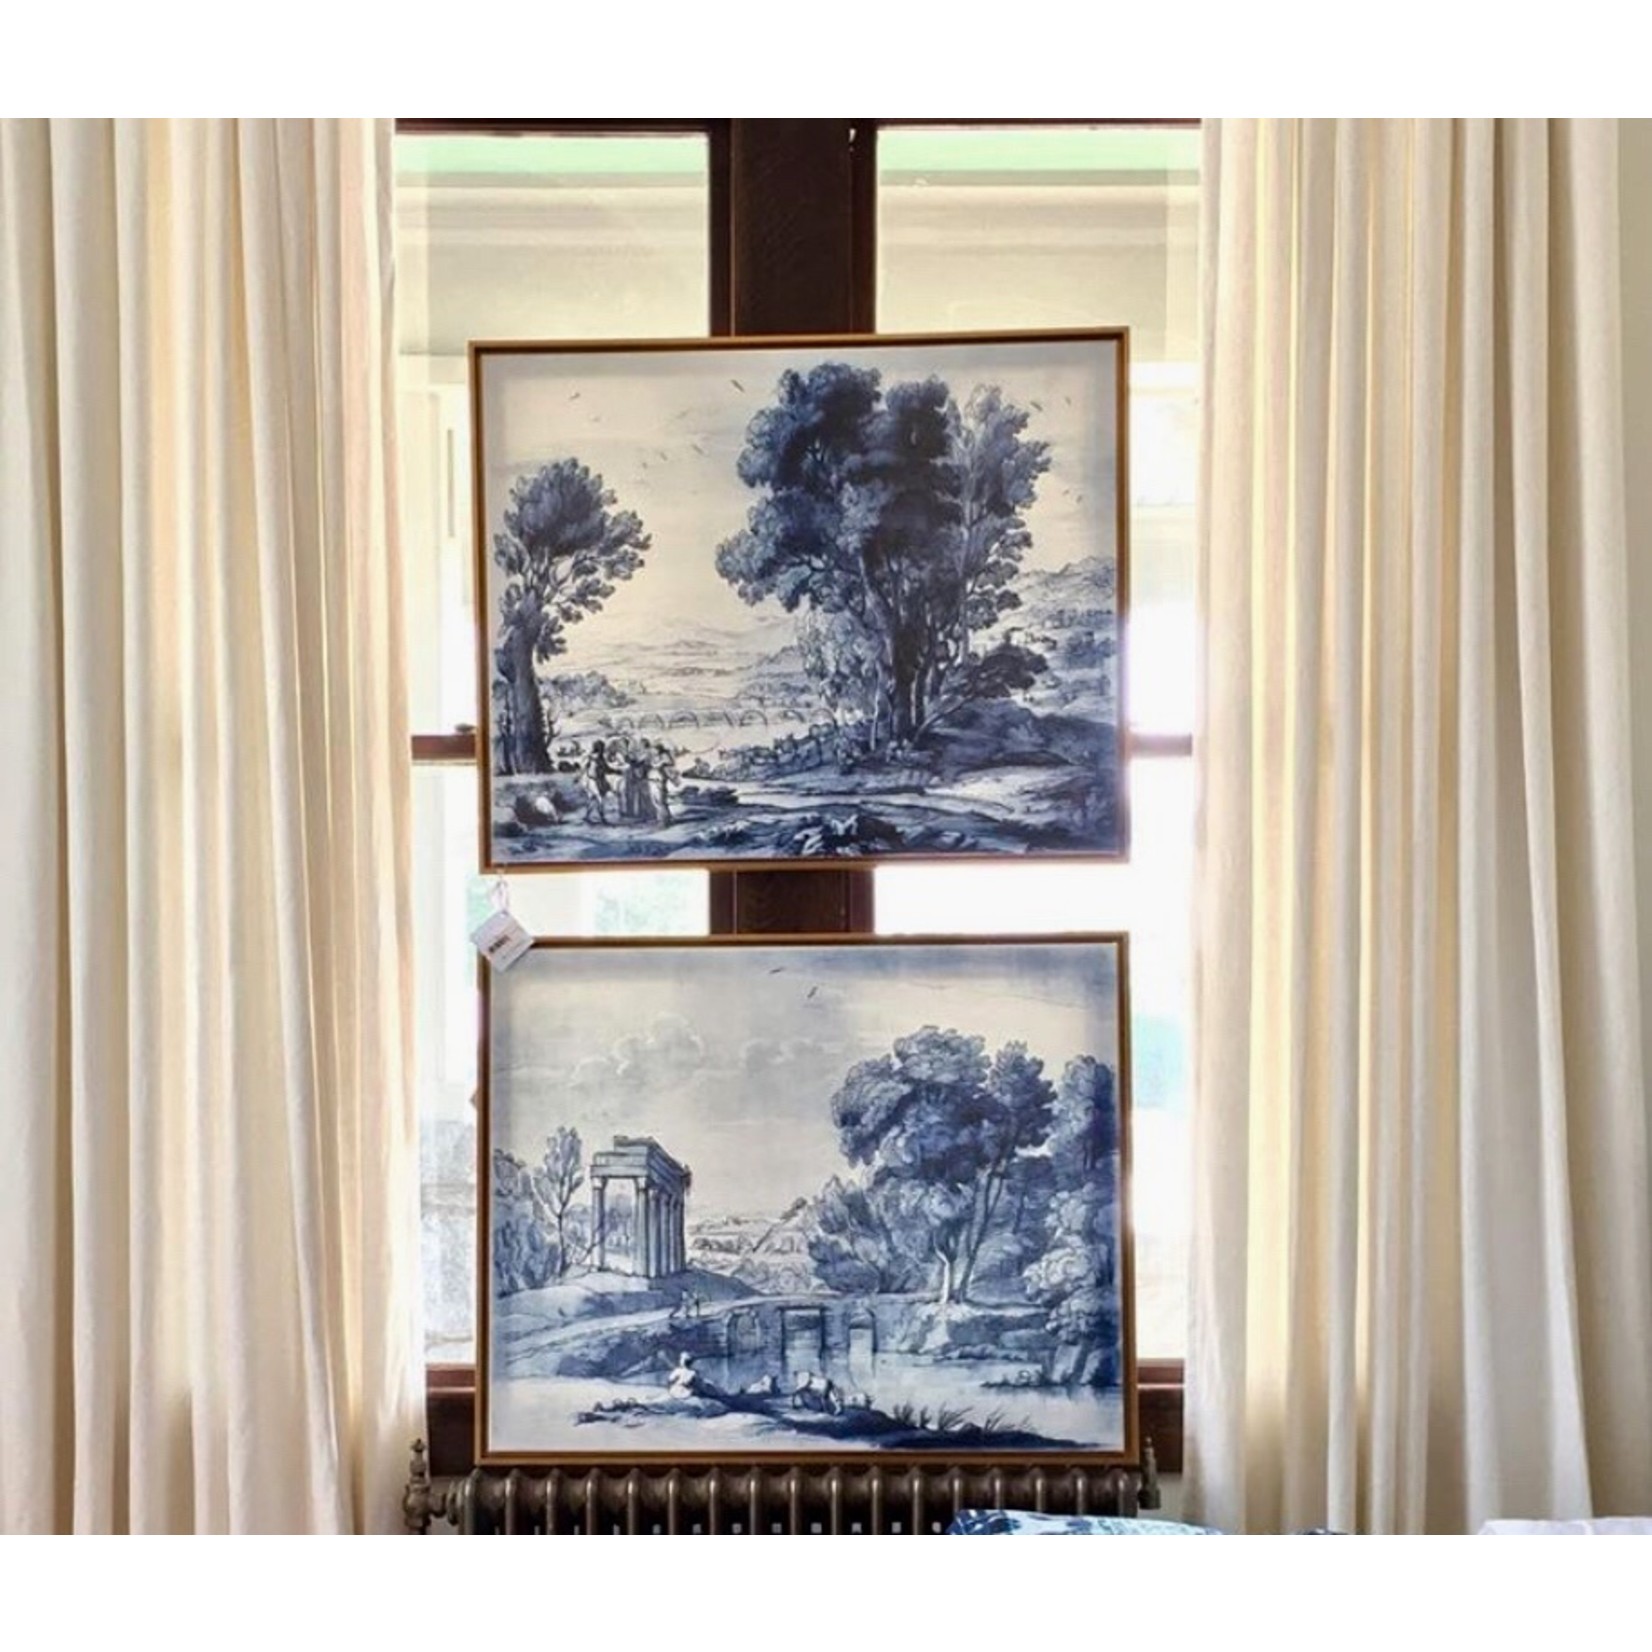 Stretched Print on Canvas Pastoral 3 from the collection of The Duke of Devonshire